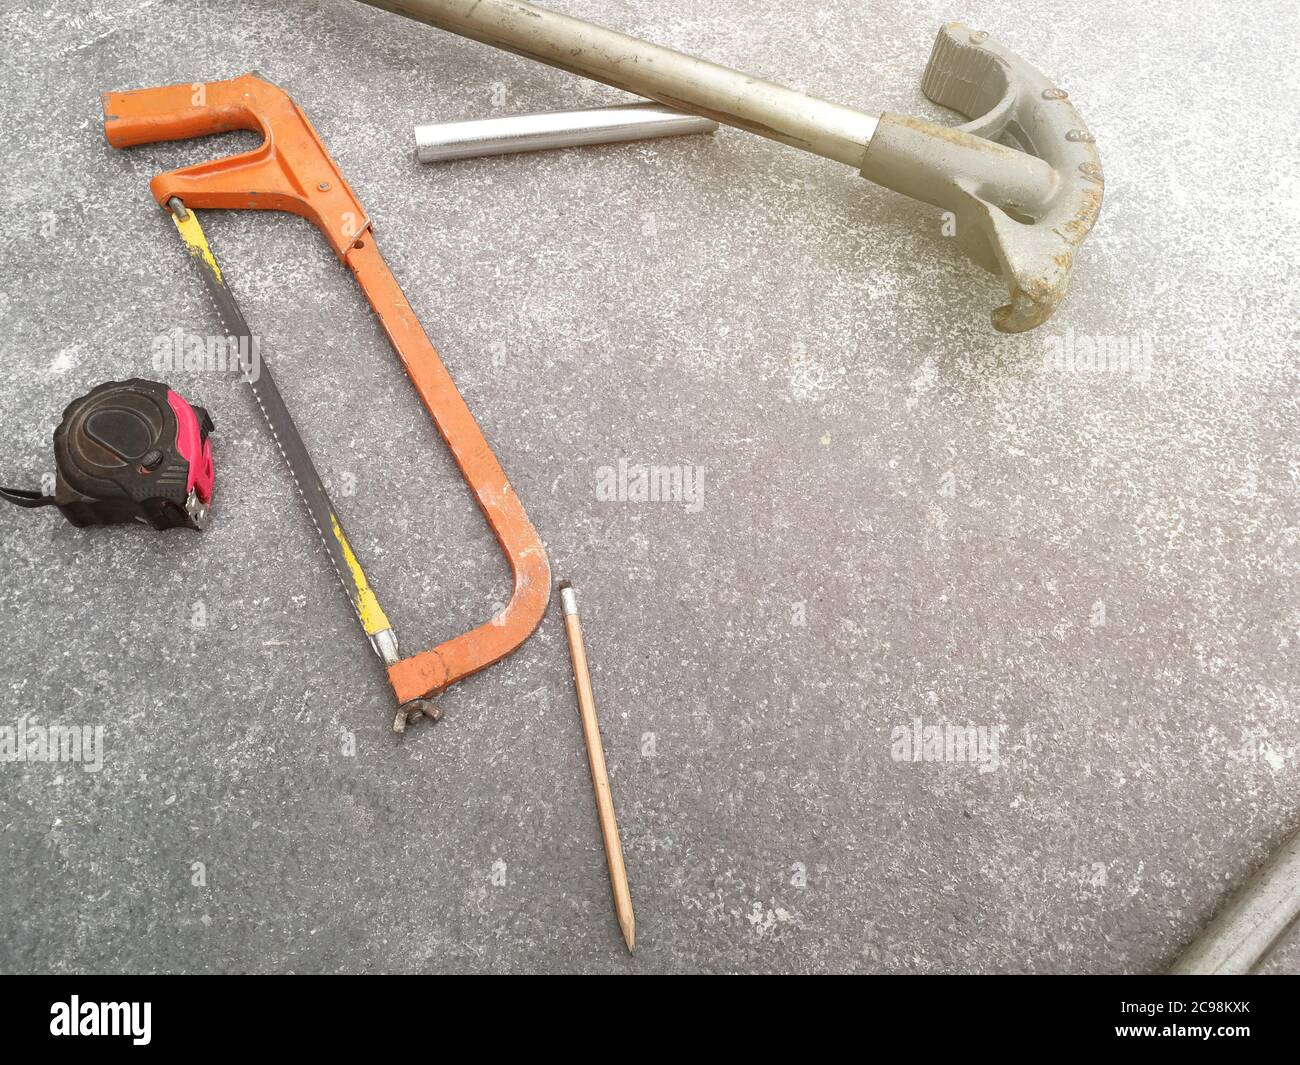 Measuring tape and Hacksaw on floor at Construction site Stock Photo